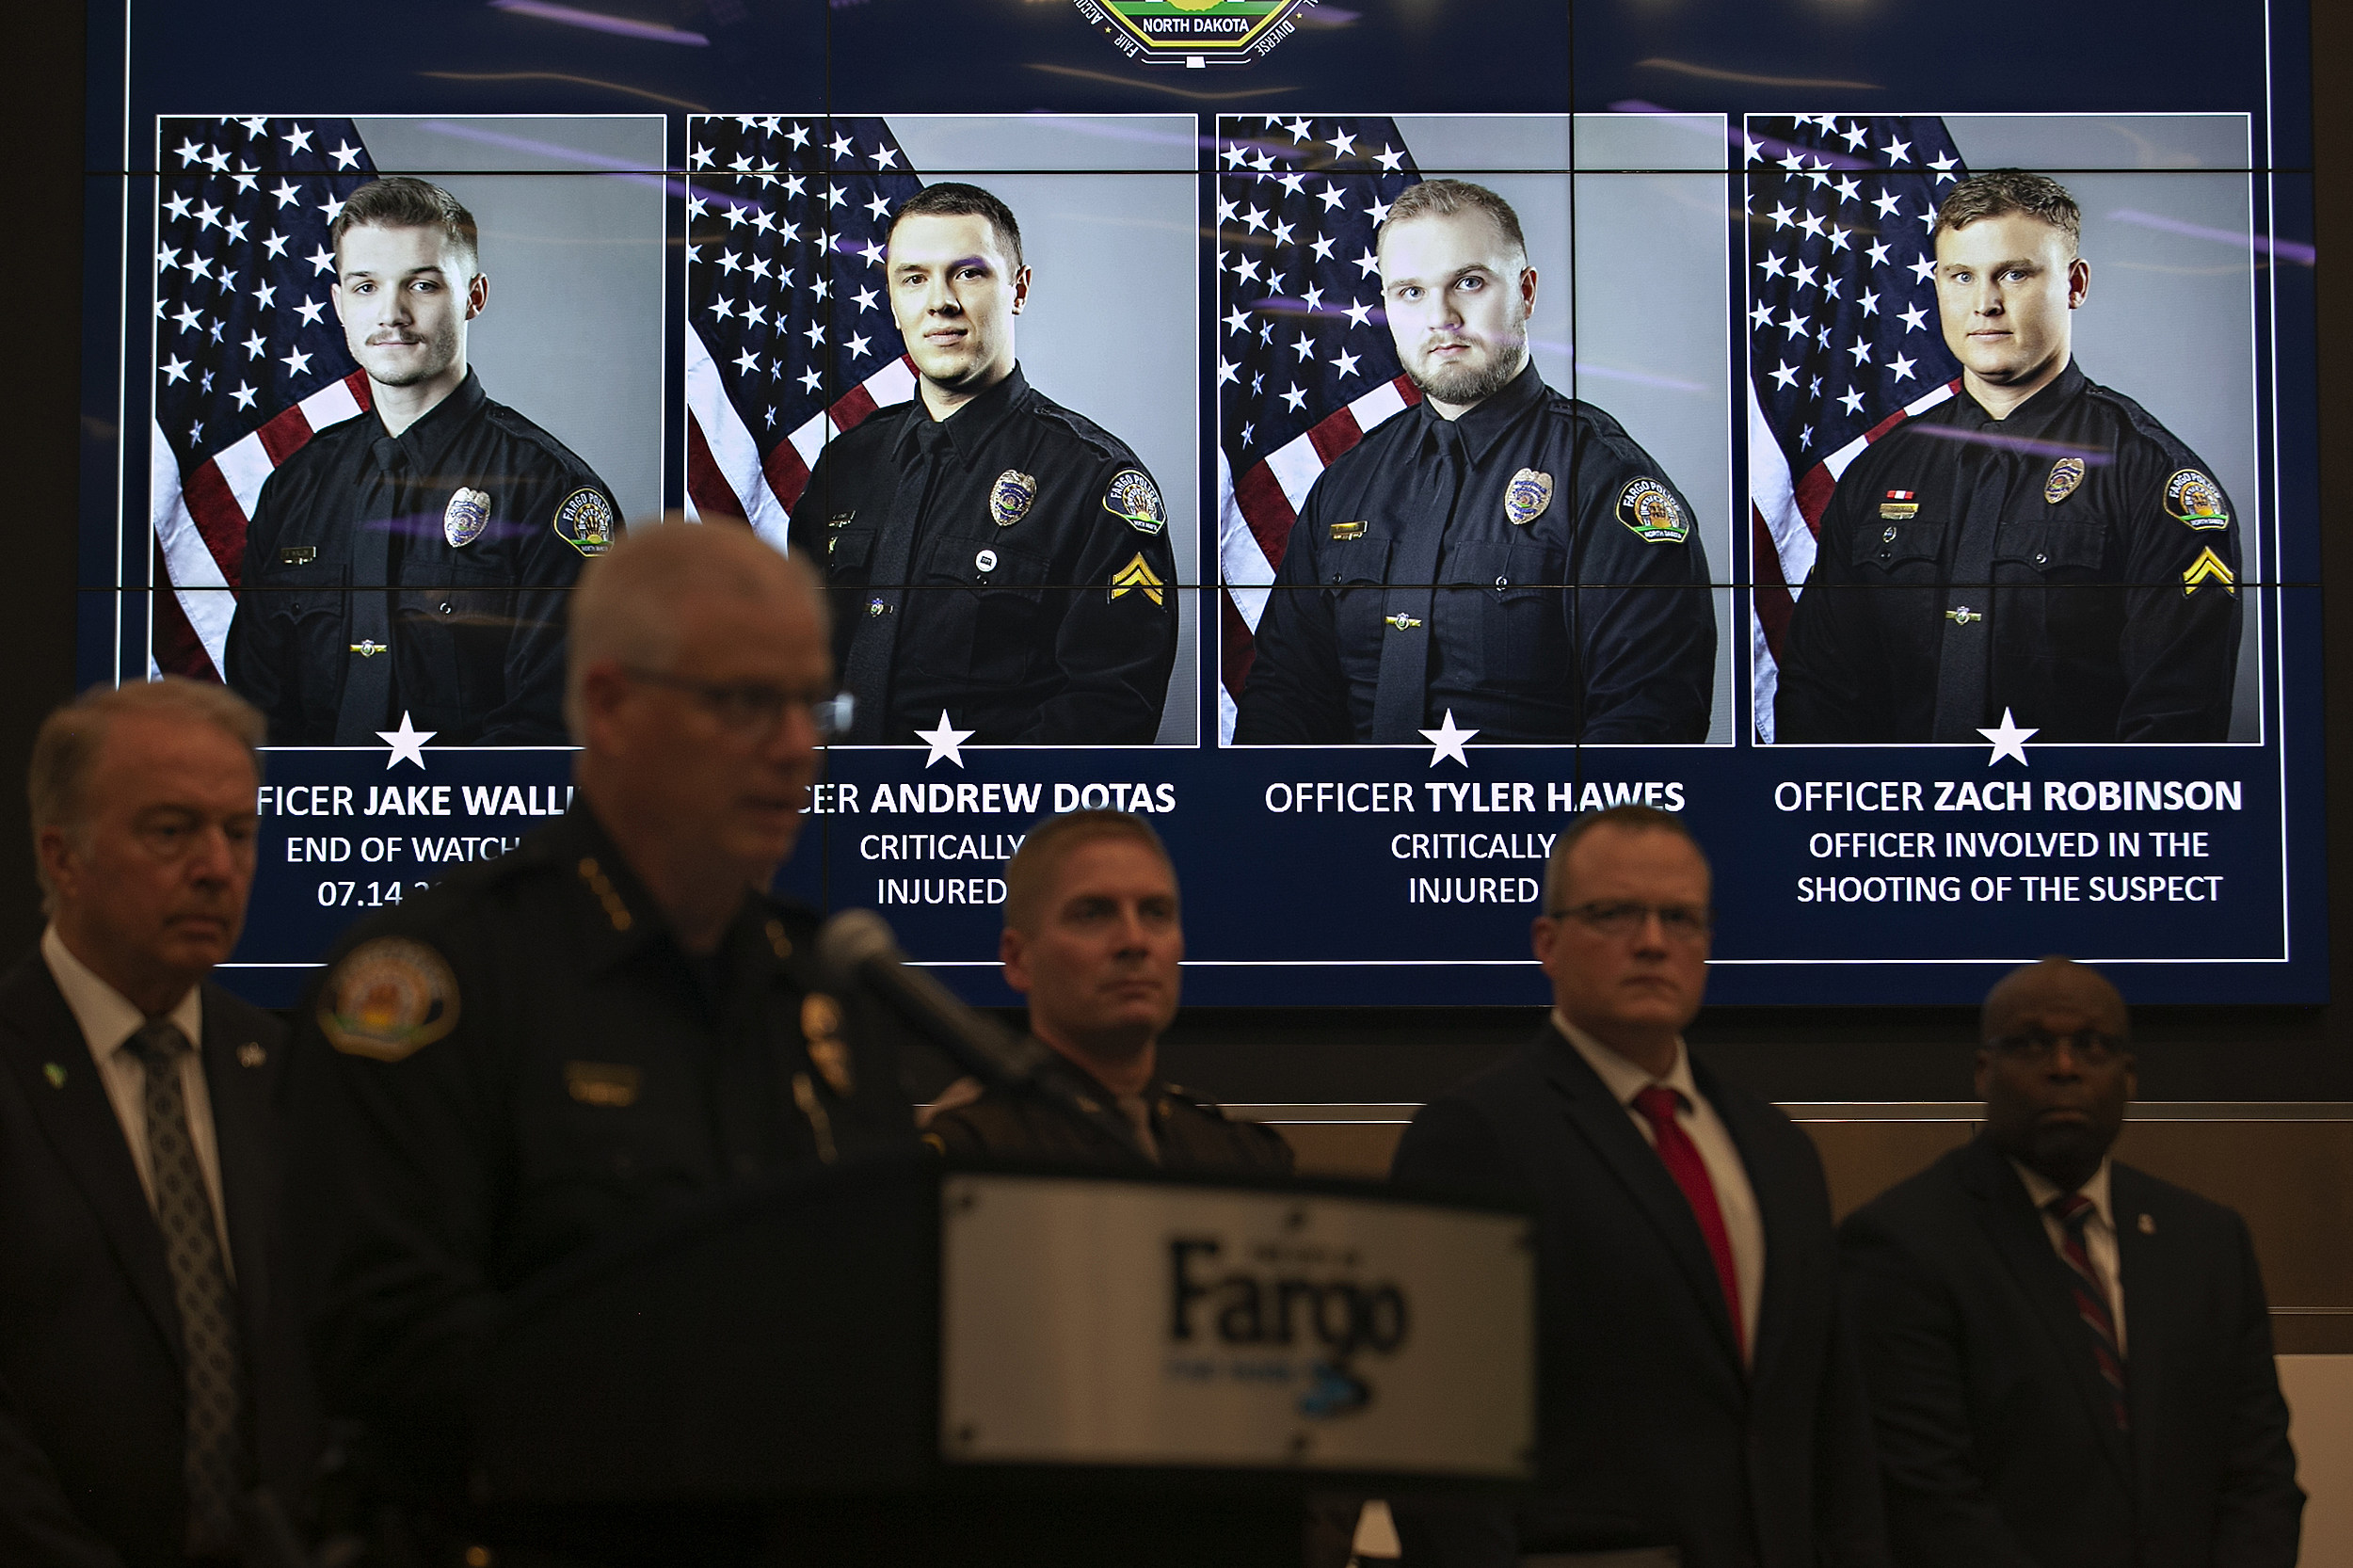 Footage Shows Shooting Ambush in Fargo That Killed an Officer Last
Month